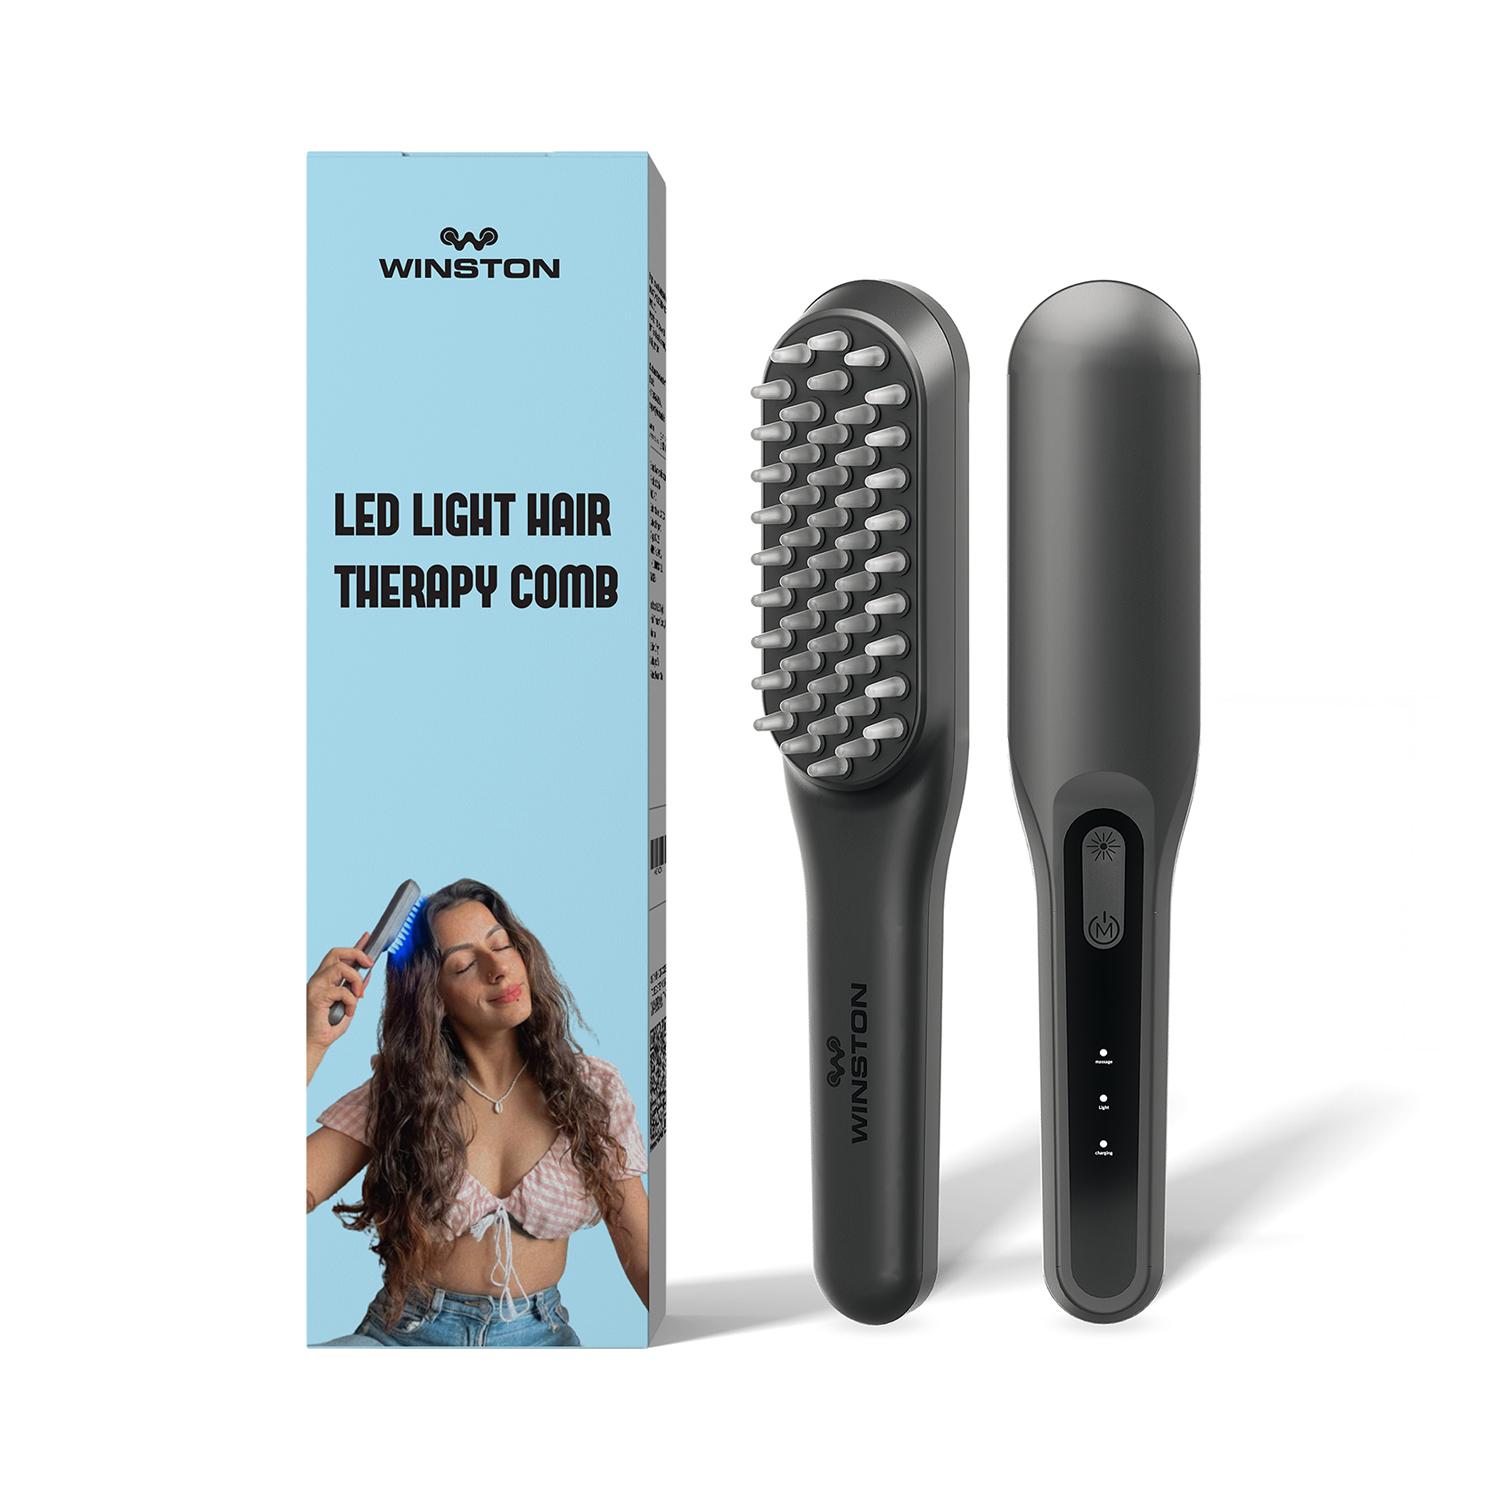 WINSTON | WINSTON LED Hair Growth Therapy Comb - Grey (1Pc)